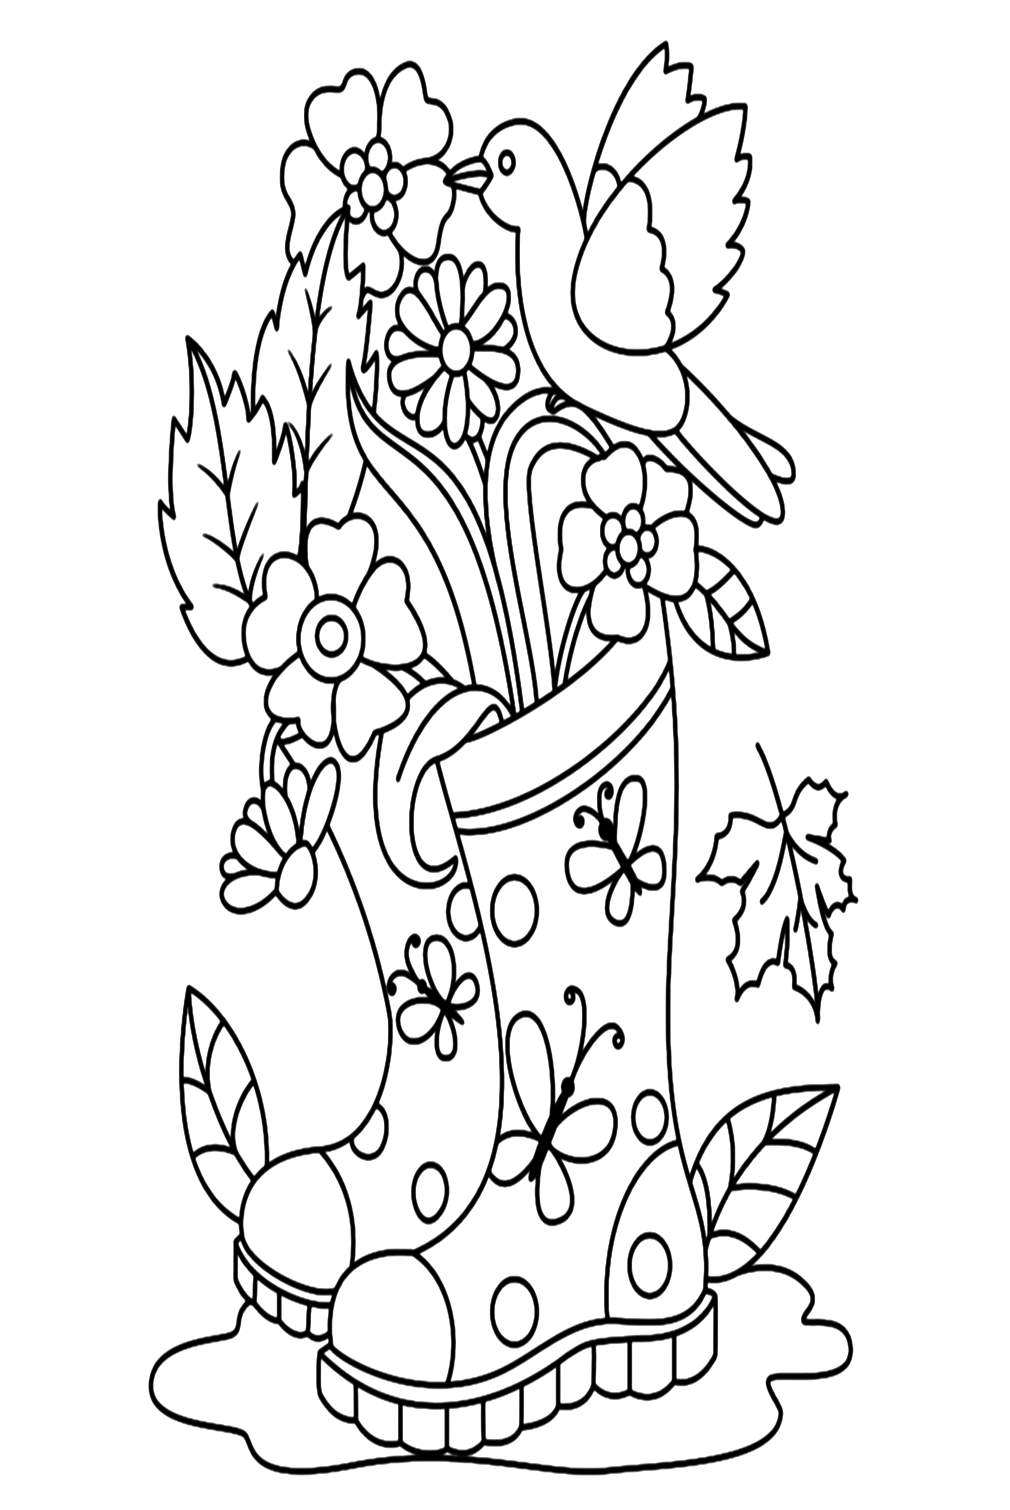 Bird And Boot Coloring Page